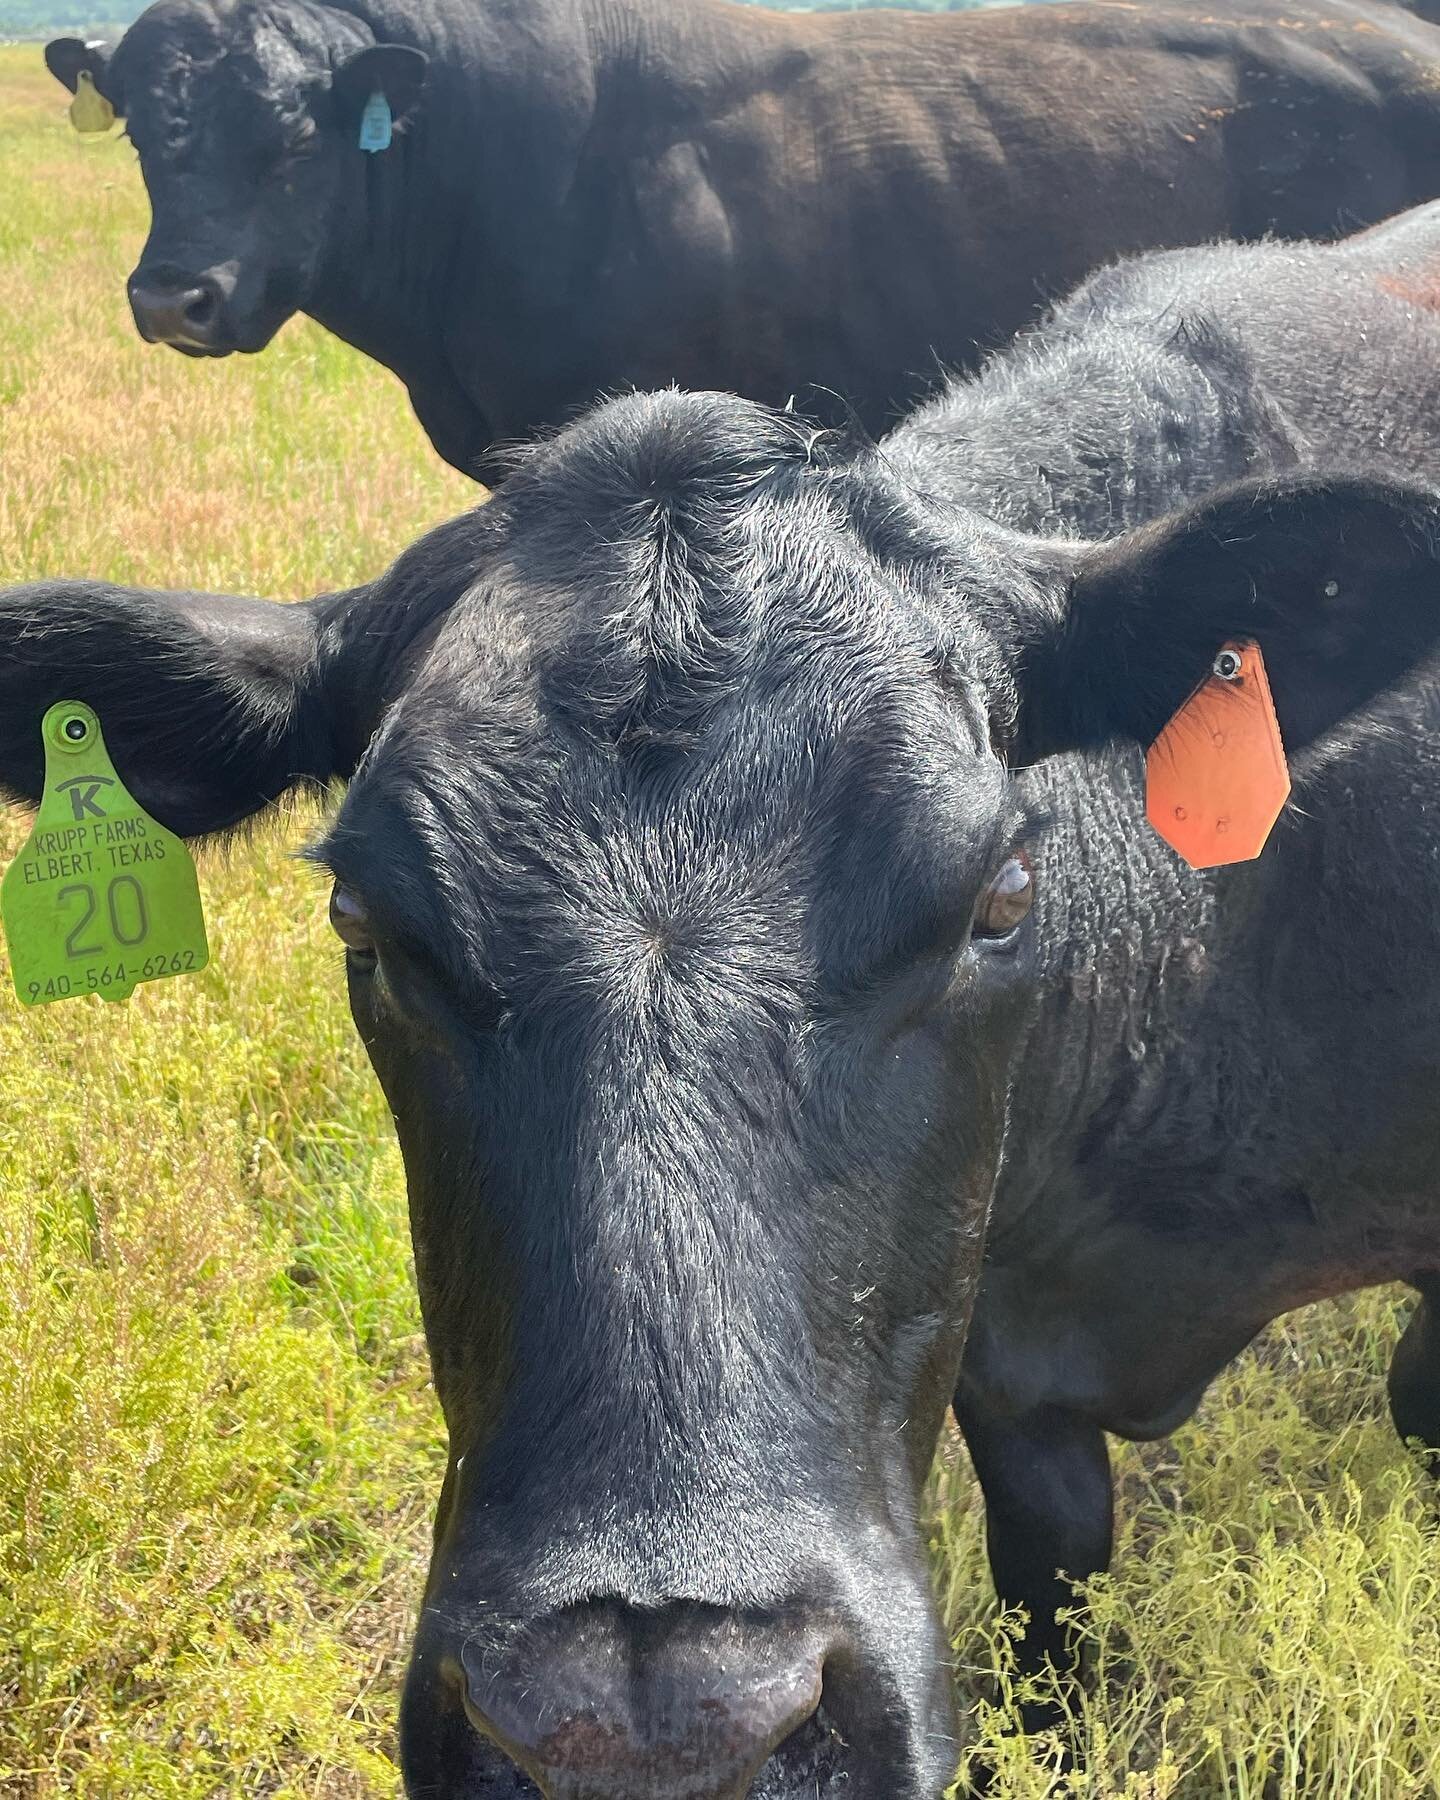 HALO K Q&amp;A #7 / Mothers Day Post 

Do you have a favorite animal in your herd??

Well you know we can&rsquo;t play favorites but my favorite type of cattle in my herd is the momma cow, so I must admit they get special care and attention.

The mom